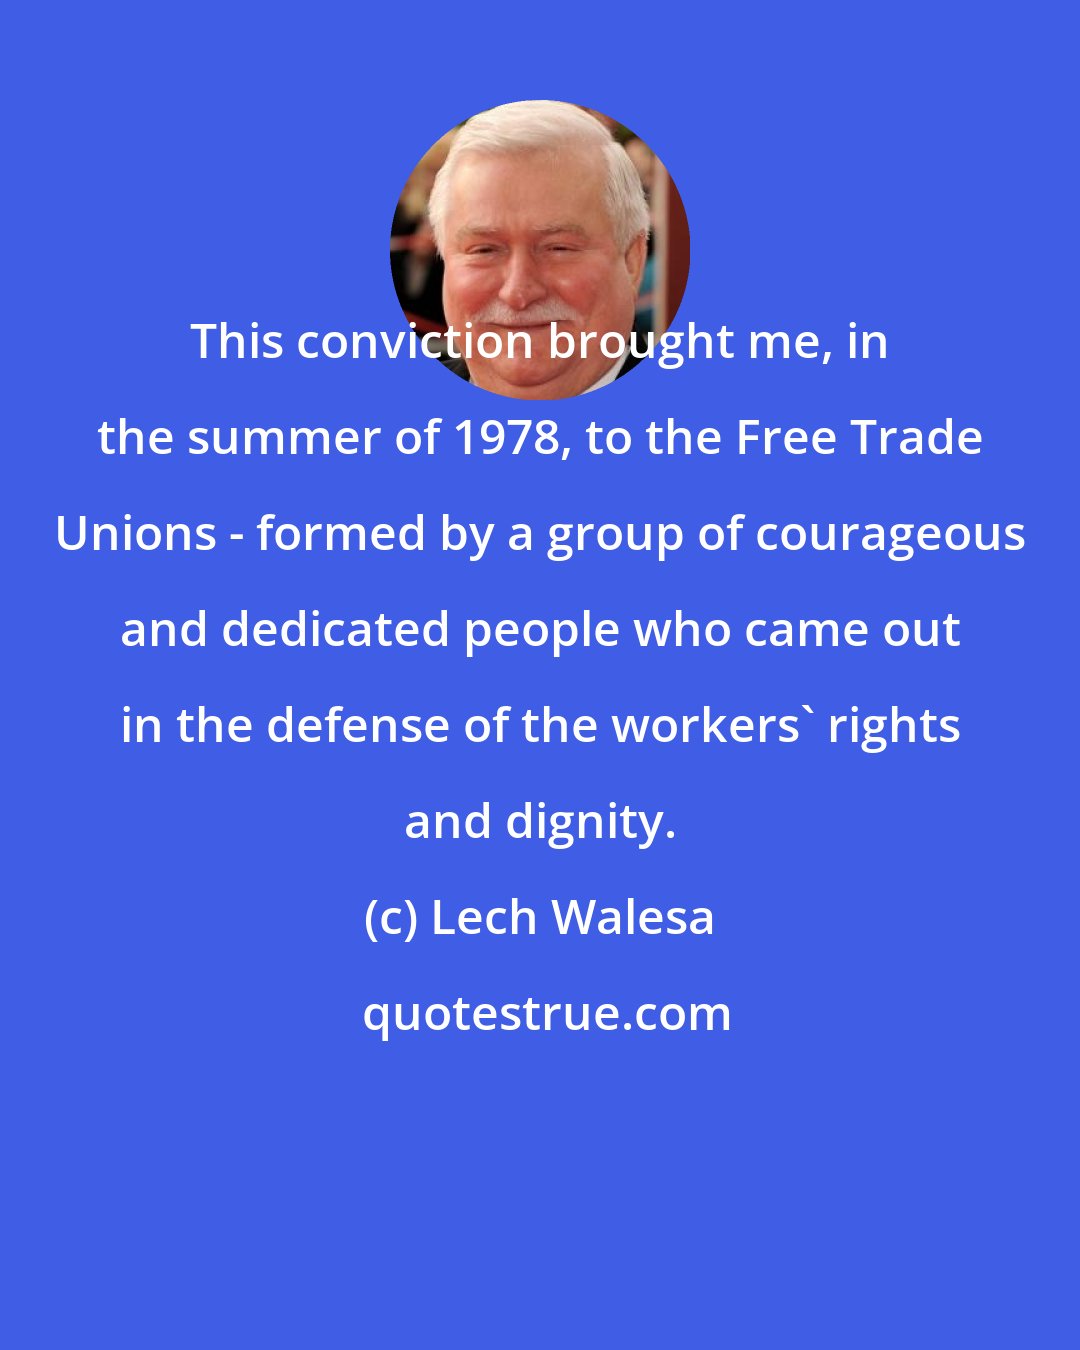 Lech Walesa: This conviction brought me, in the summer of 1978, to the Free Trade Unions - formed by a group of courageous and dedicated people who came out in the defense of the workers' rights and dignity.